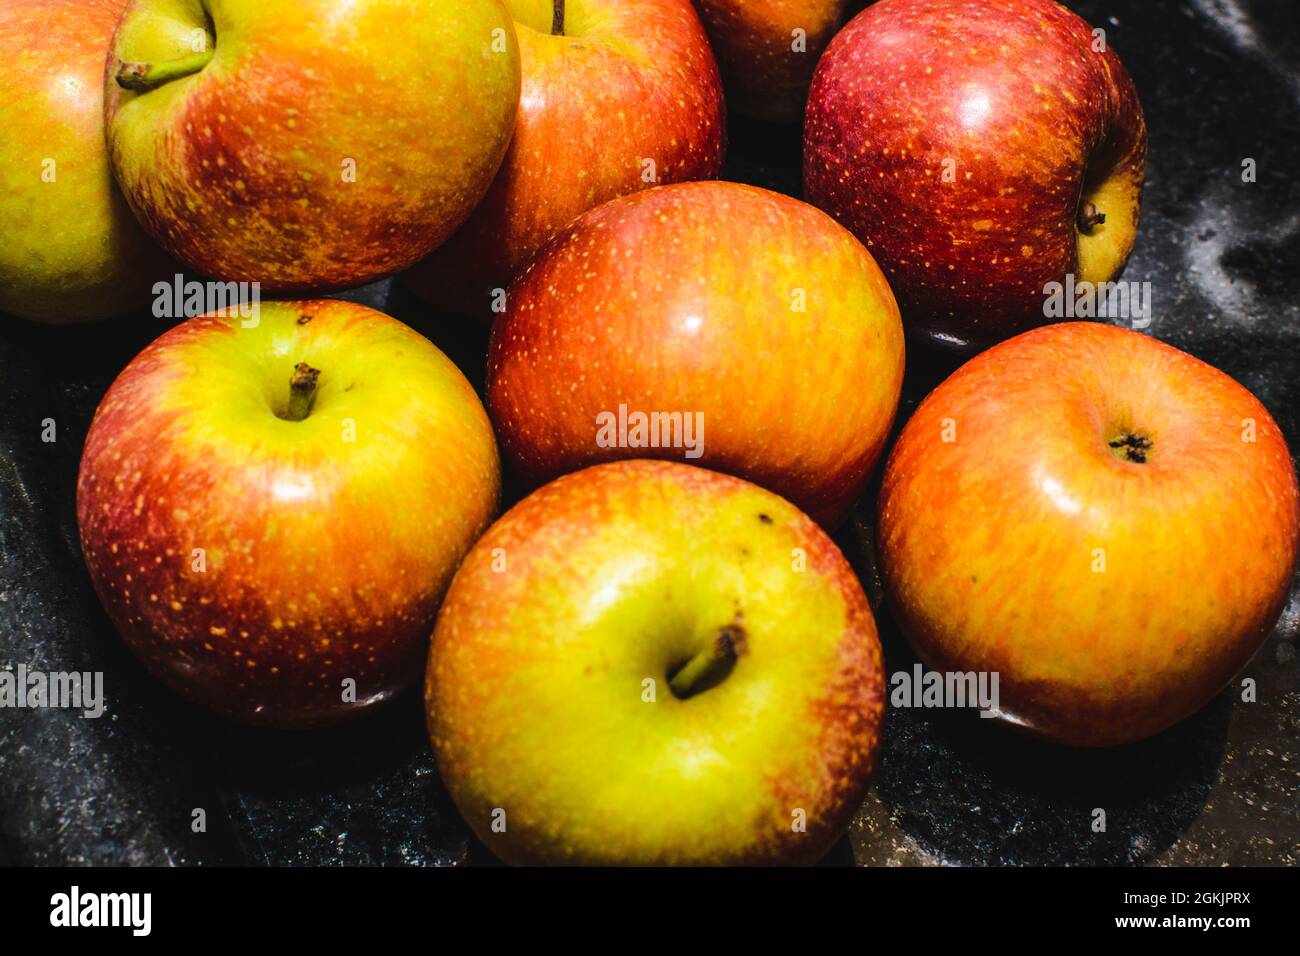 Healthy apples placed on the table for consumption. Apples grow on small, deciduous trees that bloom in spring and produce fruit in autumn. Stock Photo